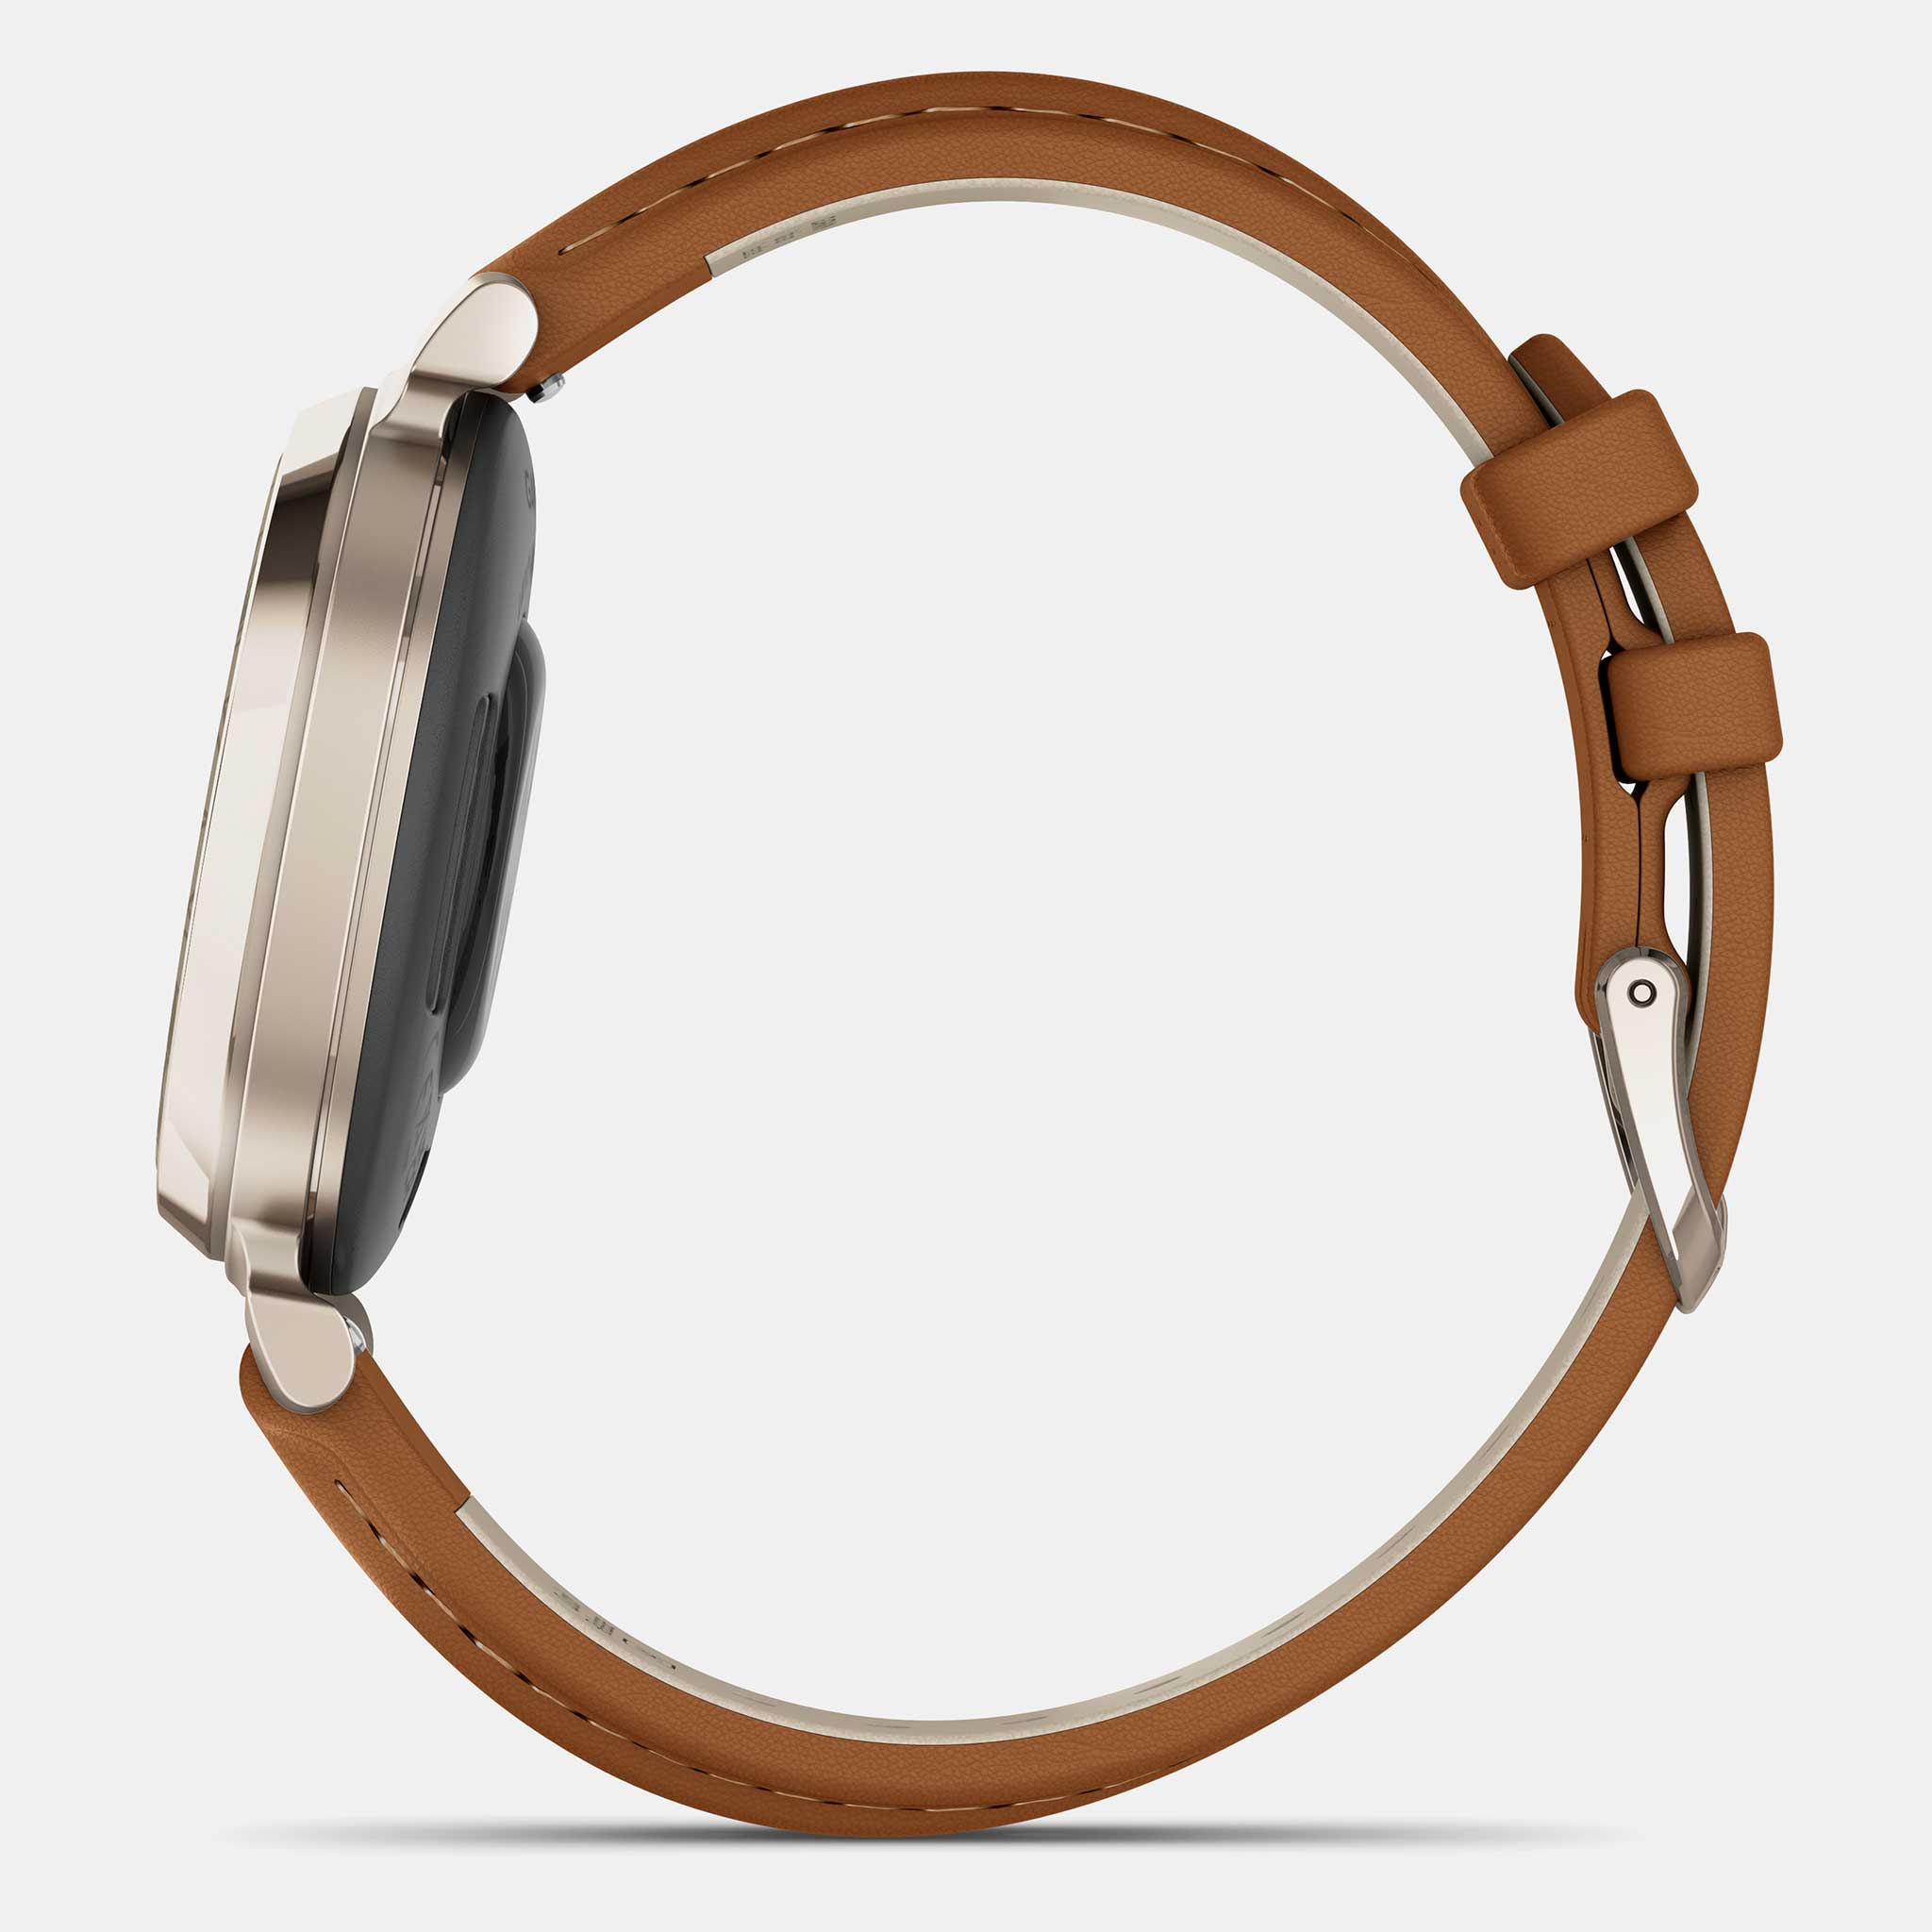 Garmin Lily 2 Leather Band